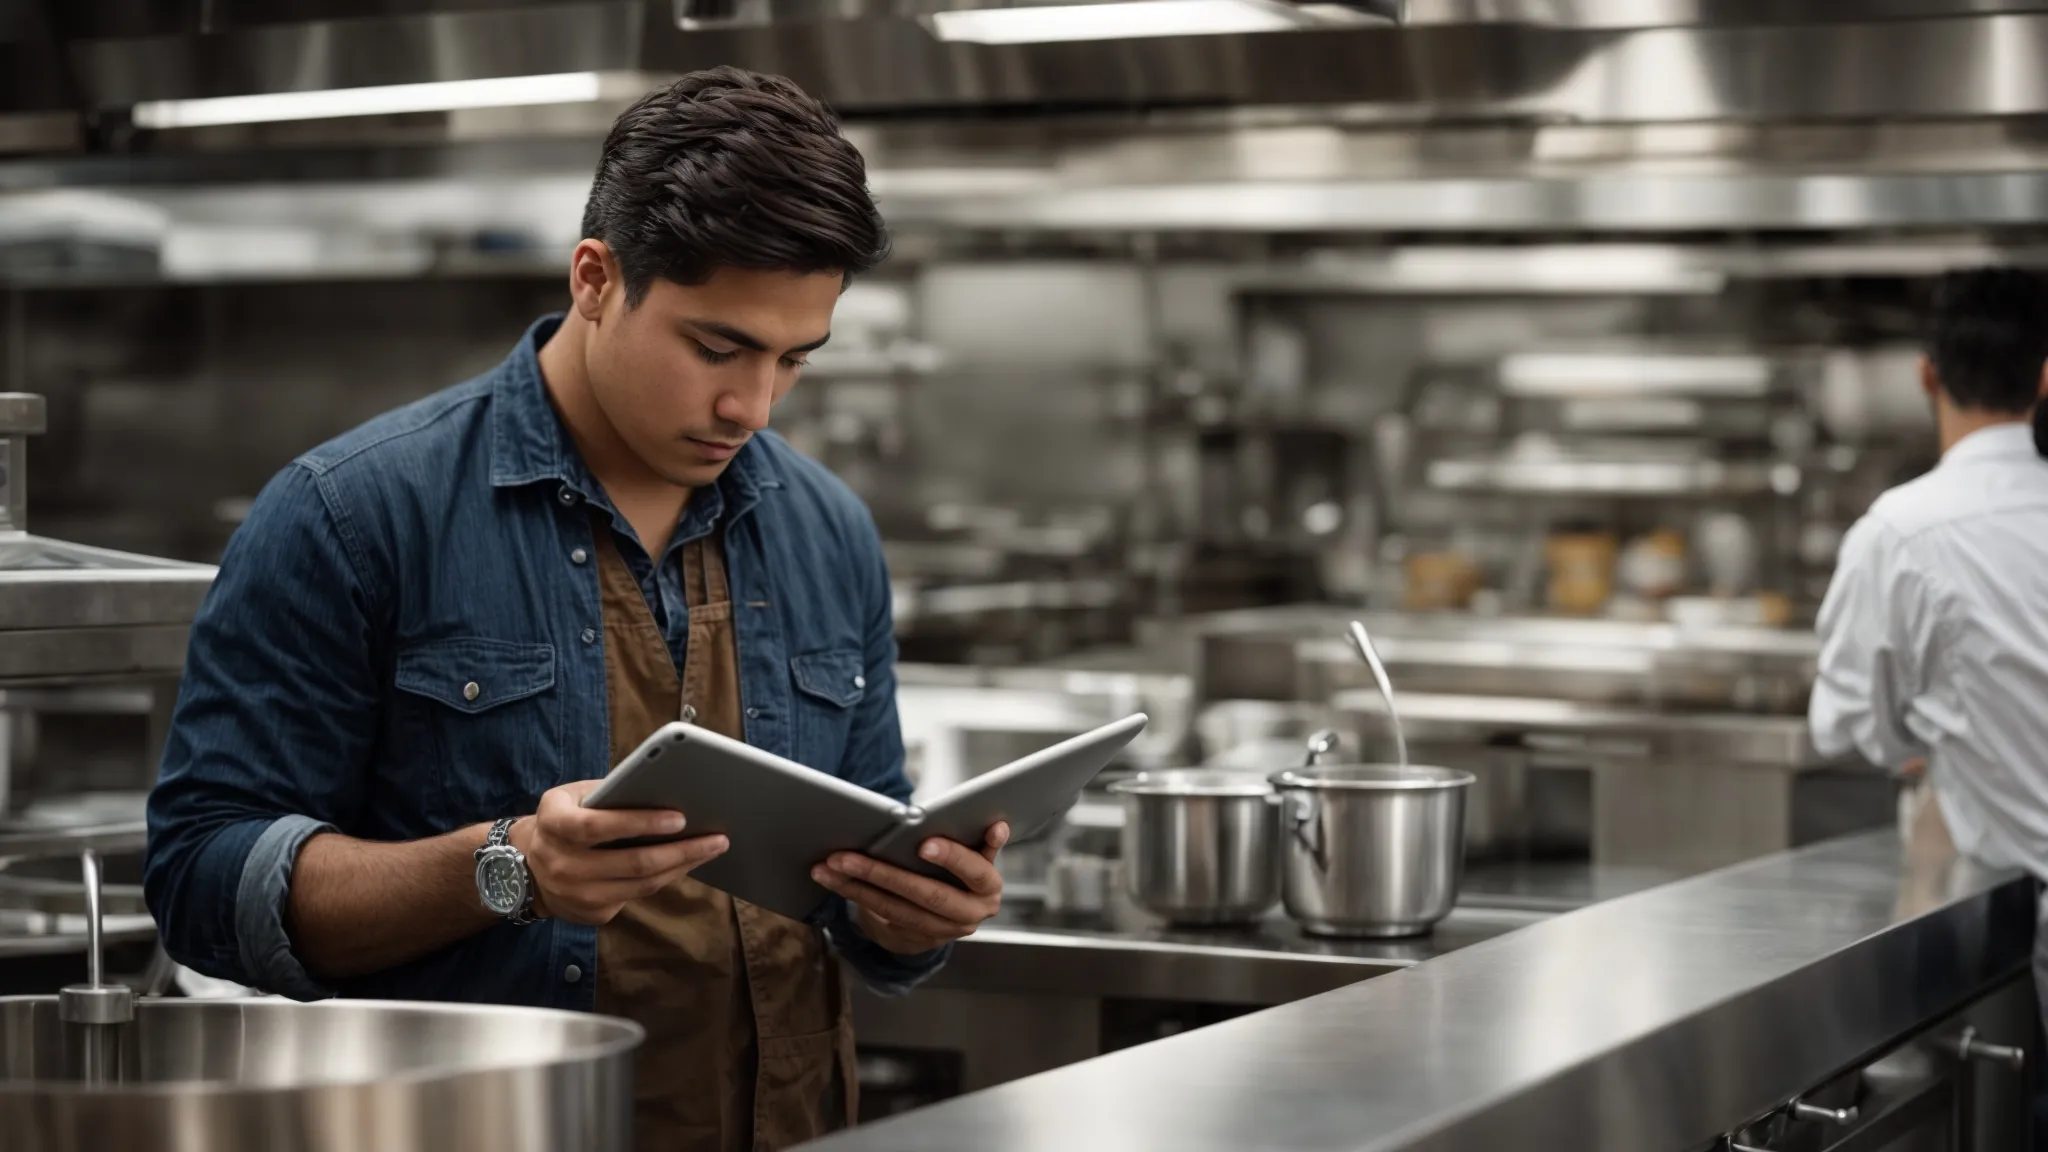 a customer intently reading reviews on a tablet in a busy commercial kitchen.